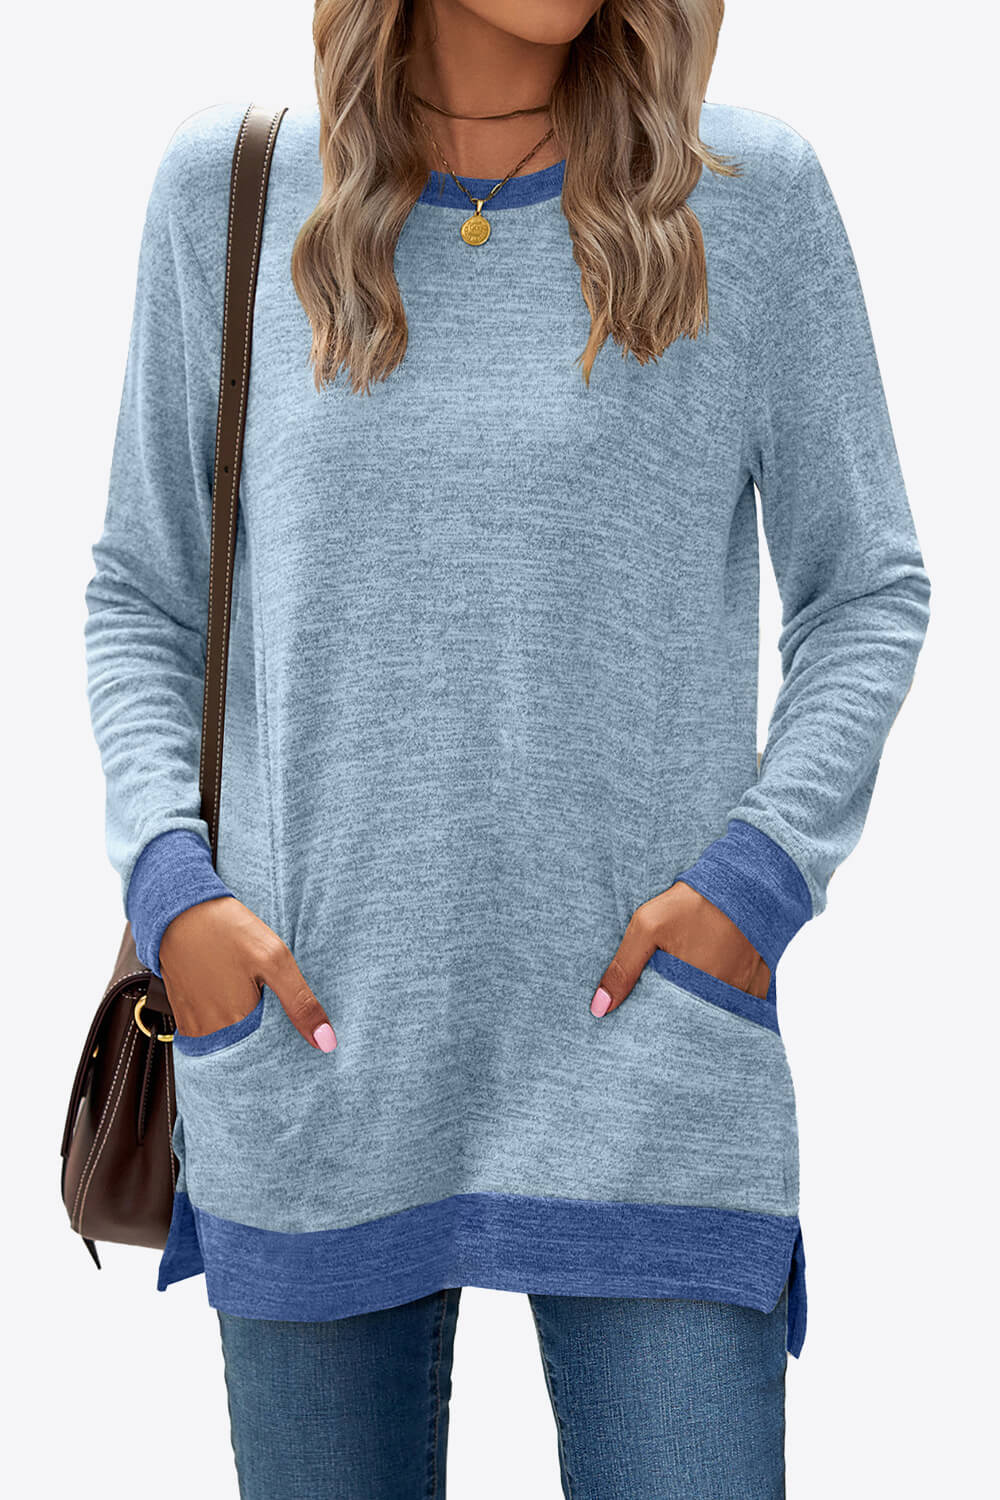 Heathered Slit Top with Pockets - Light Blue / S - T-Shirts - Shirts & Tops - 7 - 2024